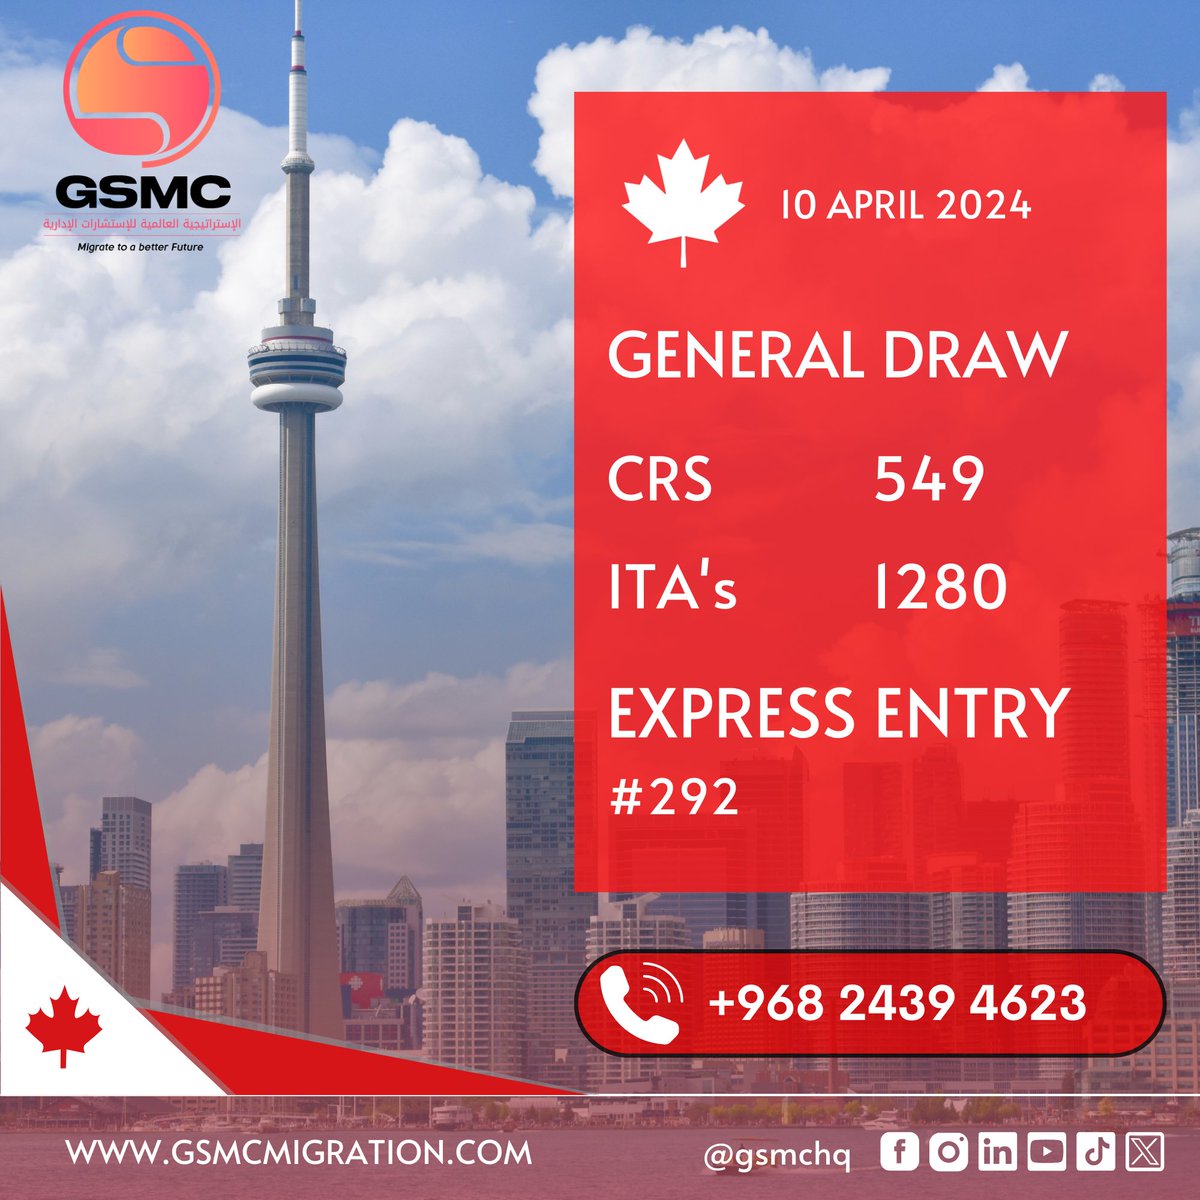 CRS Score Update: ITA's Issued with CRS Scores ranging from 549 to 1280 in the General Draw on April 10, 2024, for Express Entry candidates.

Apply Now!
wa.me/96824394623

#GSMC #migrateabroad #ExpressEntry #expressentrydraw